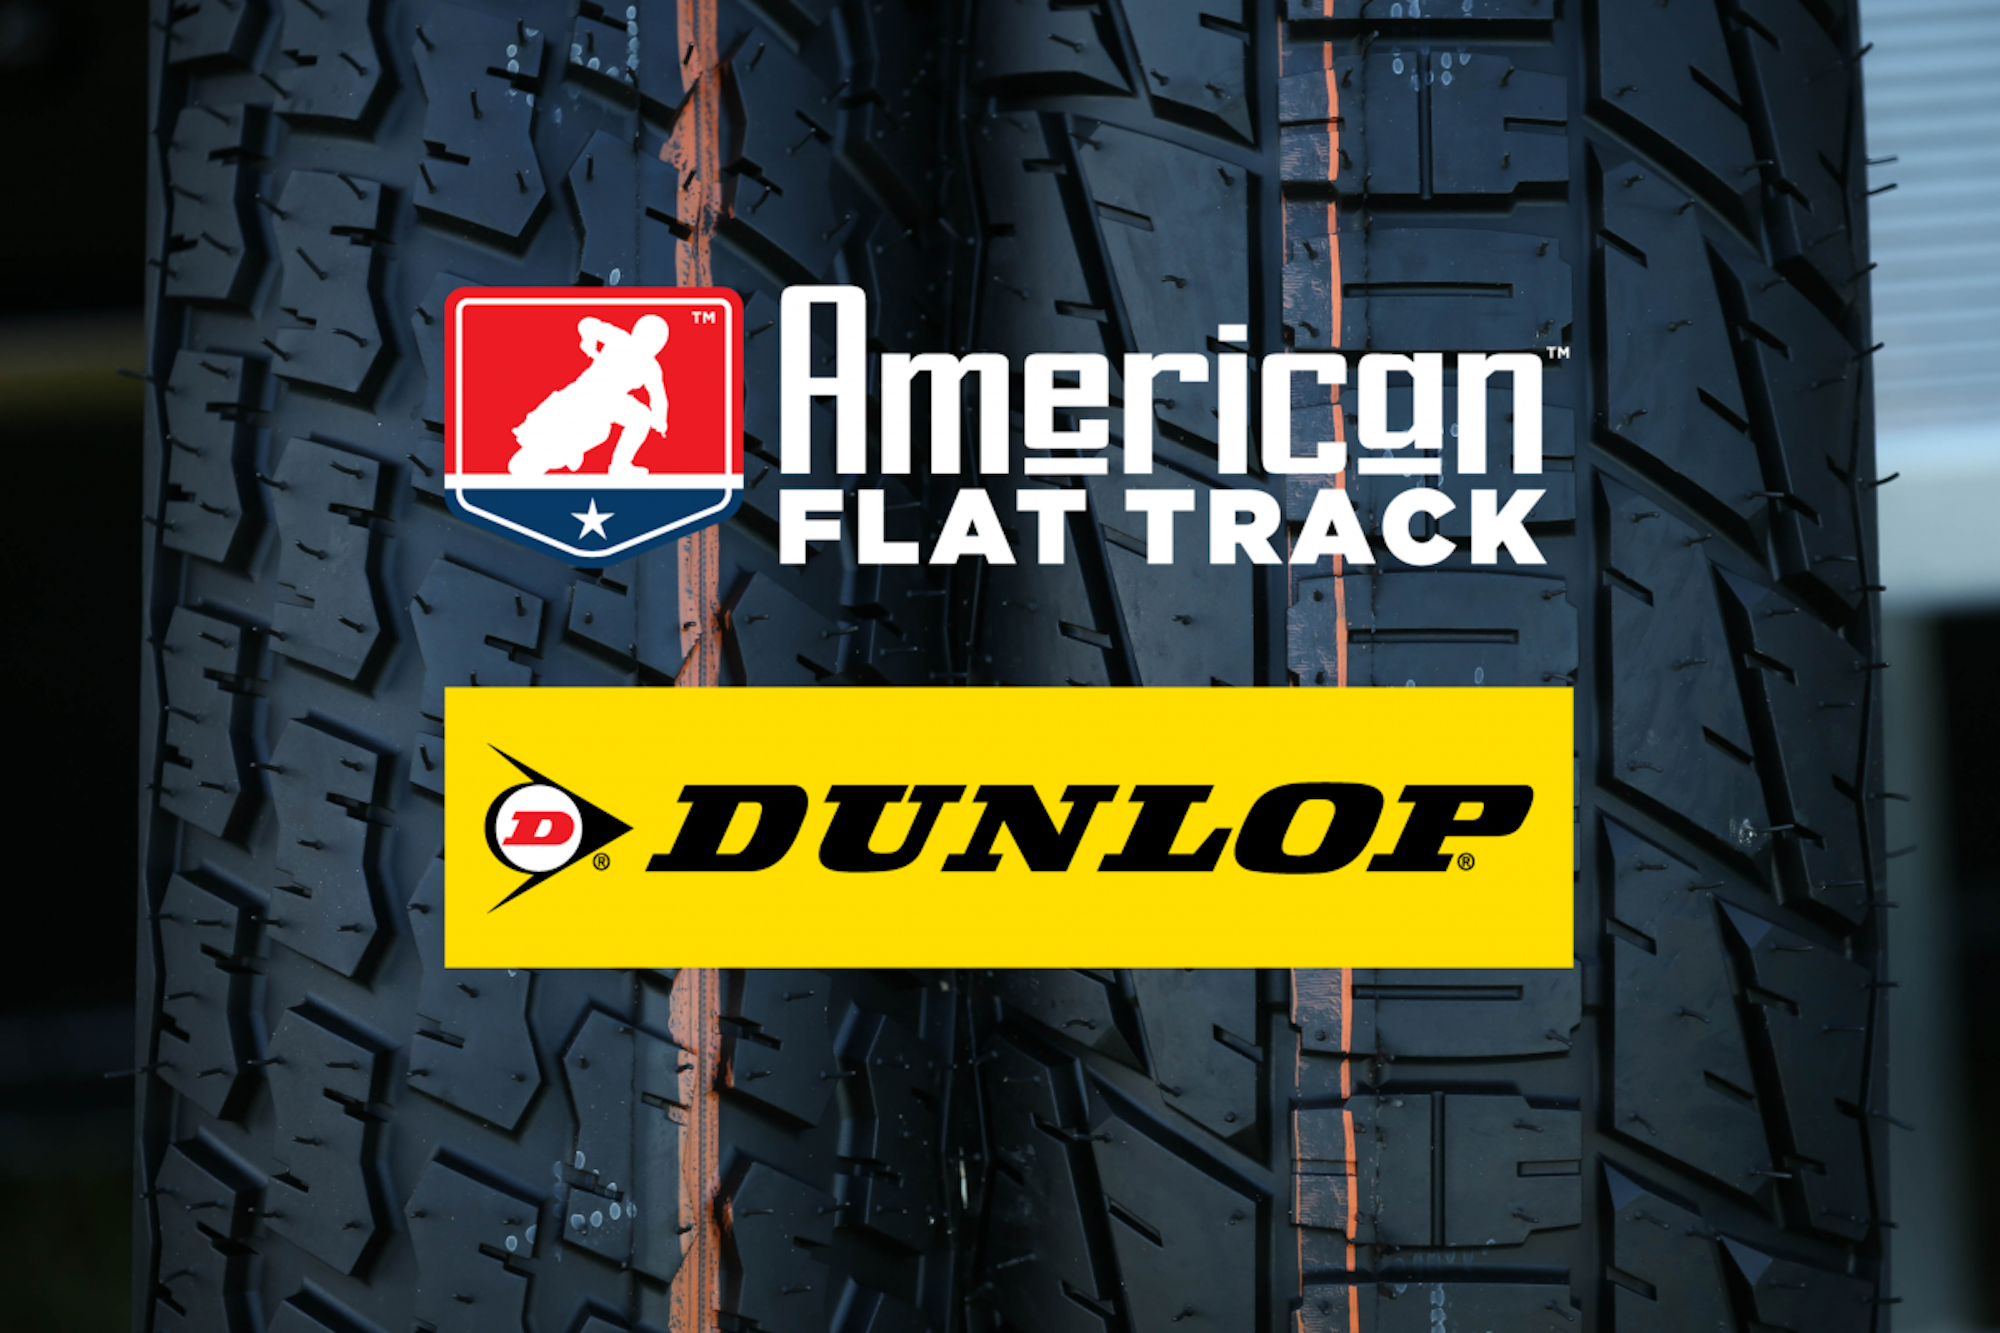 American Flat Track logo next to the Dunlop Tires logo. Media sourced from AFT.